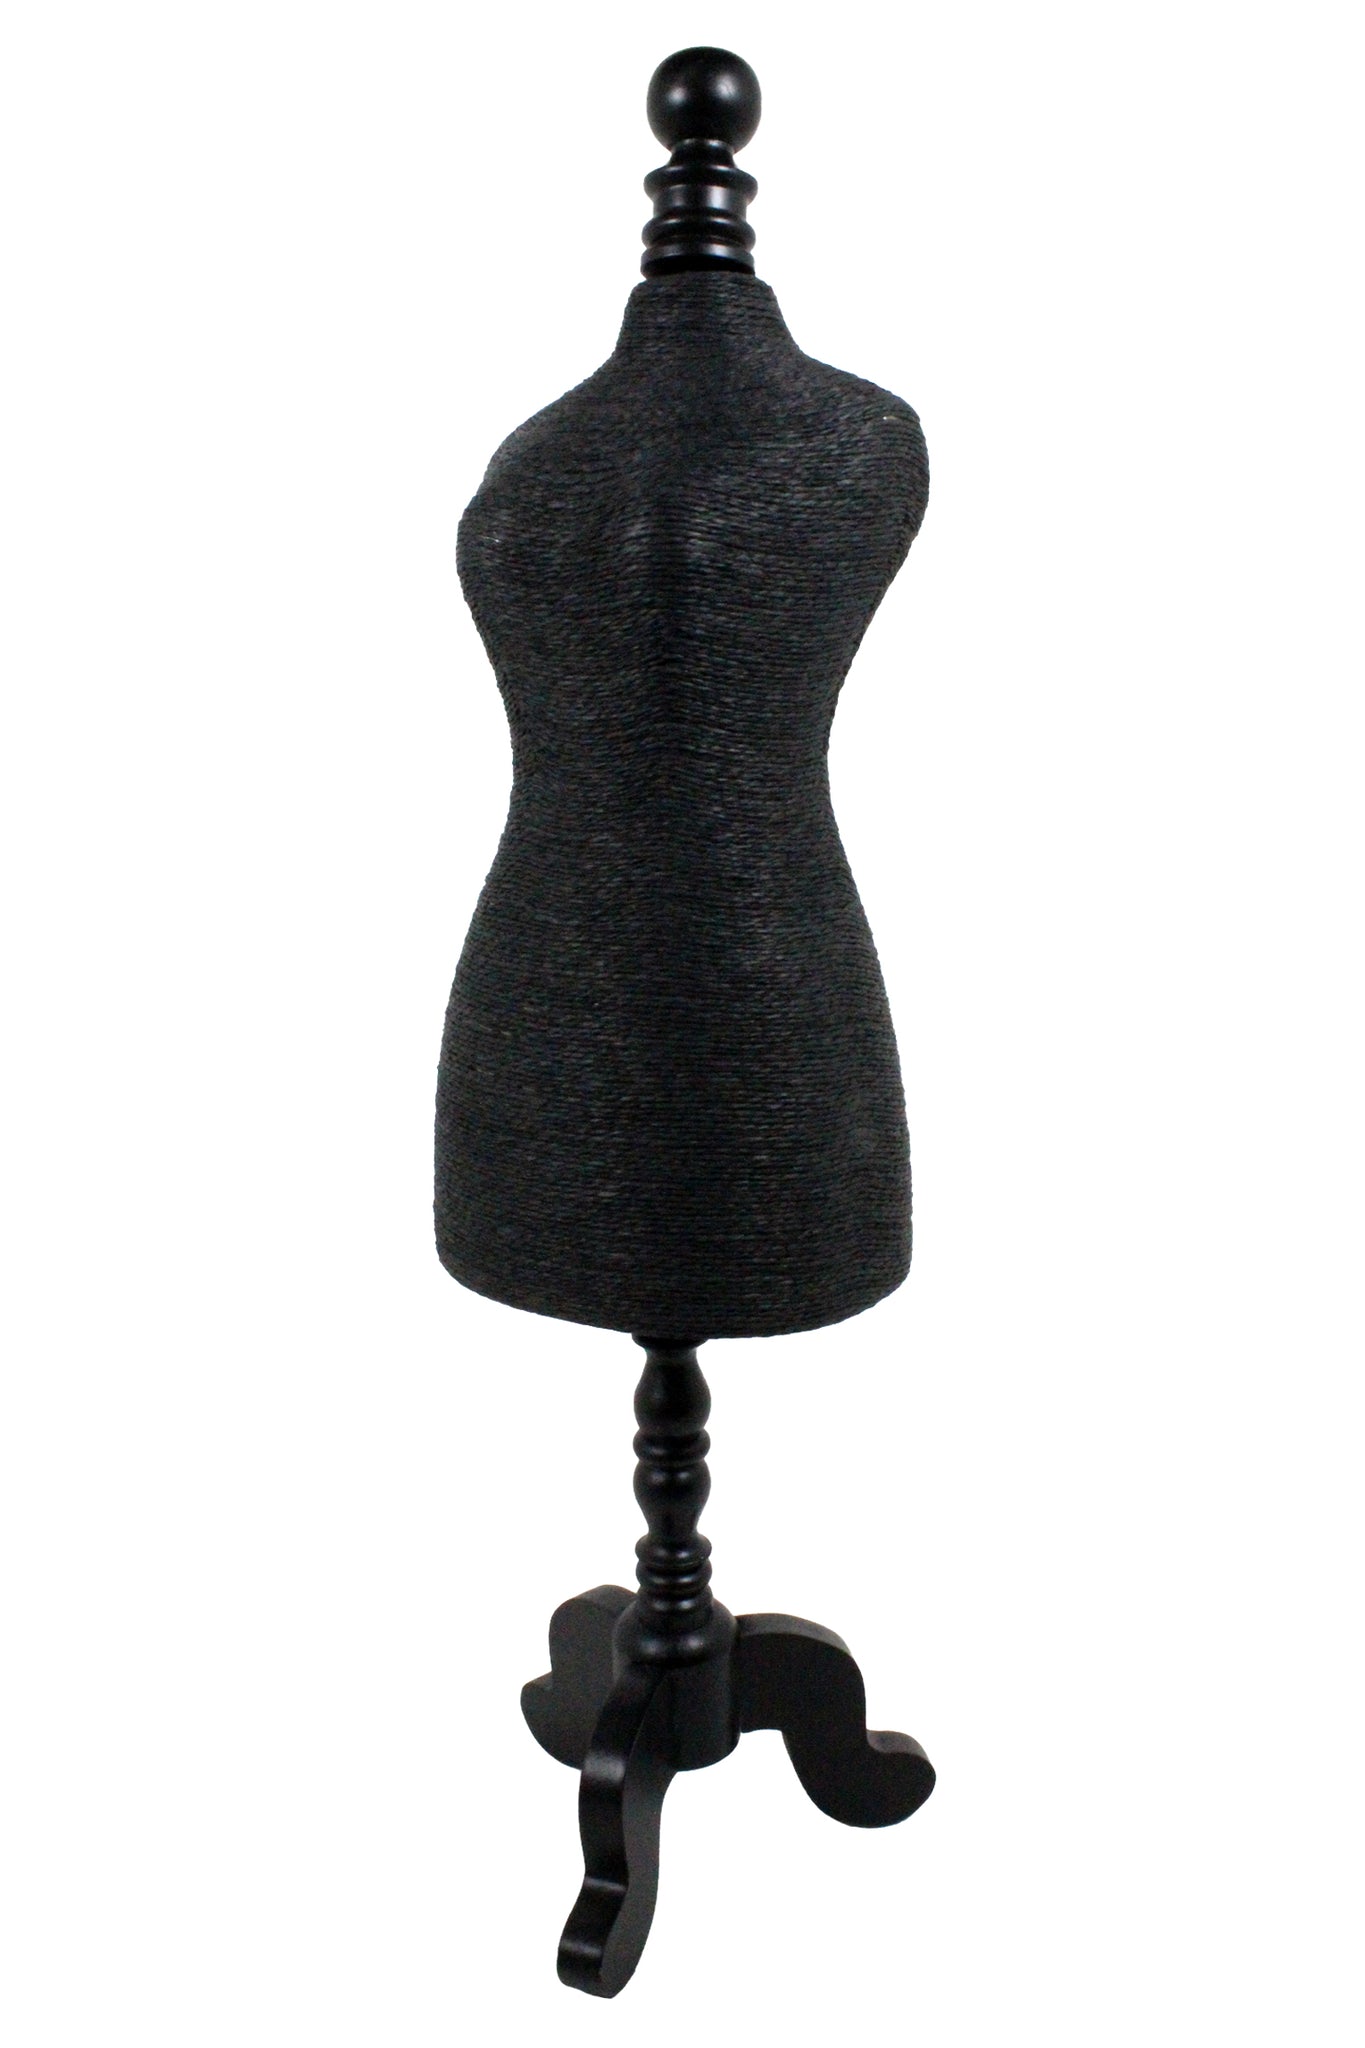 PE2280 - Woven Straw Mannequin Jewelry Display